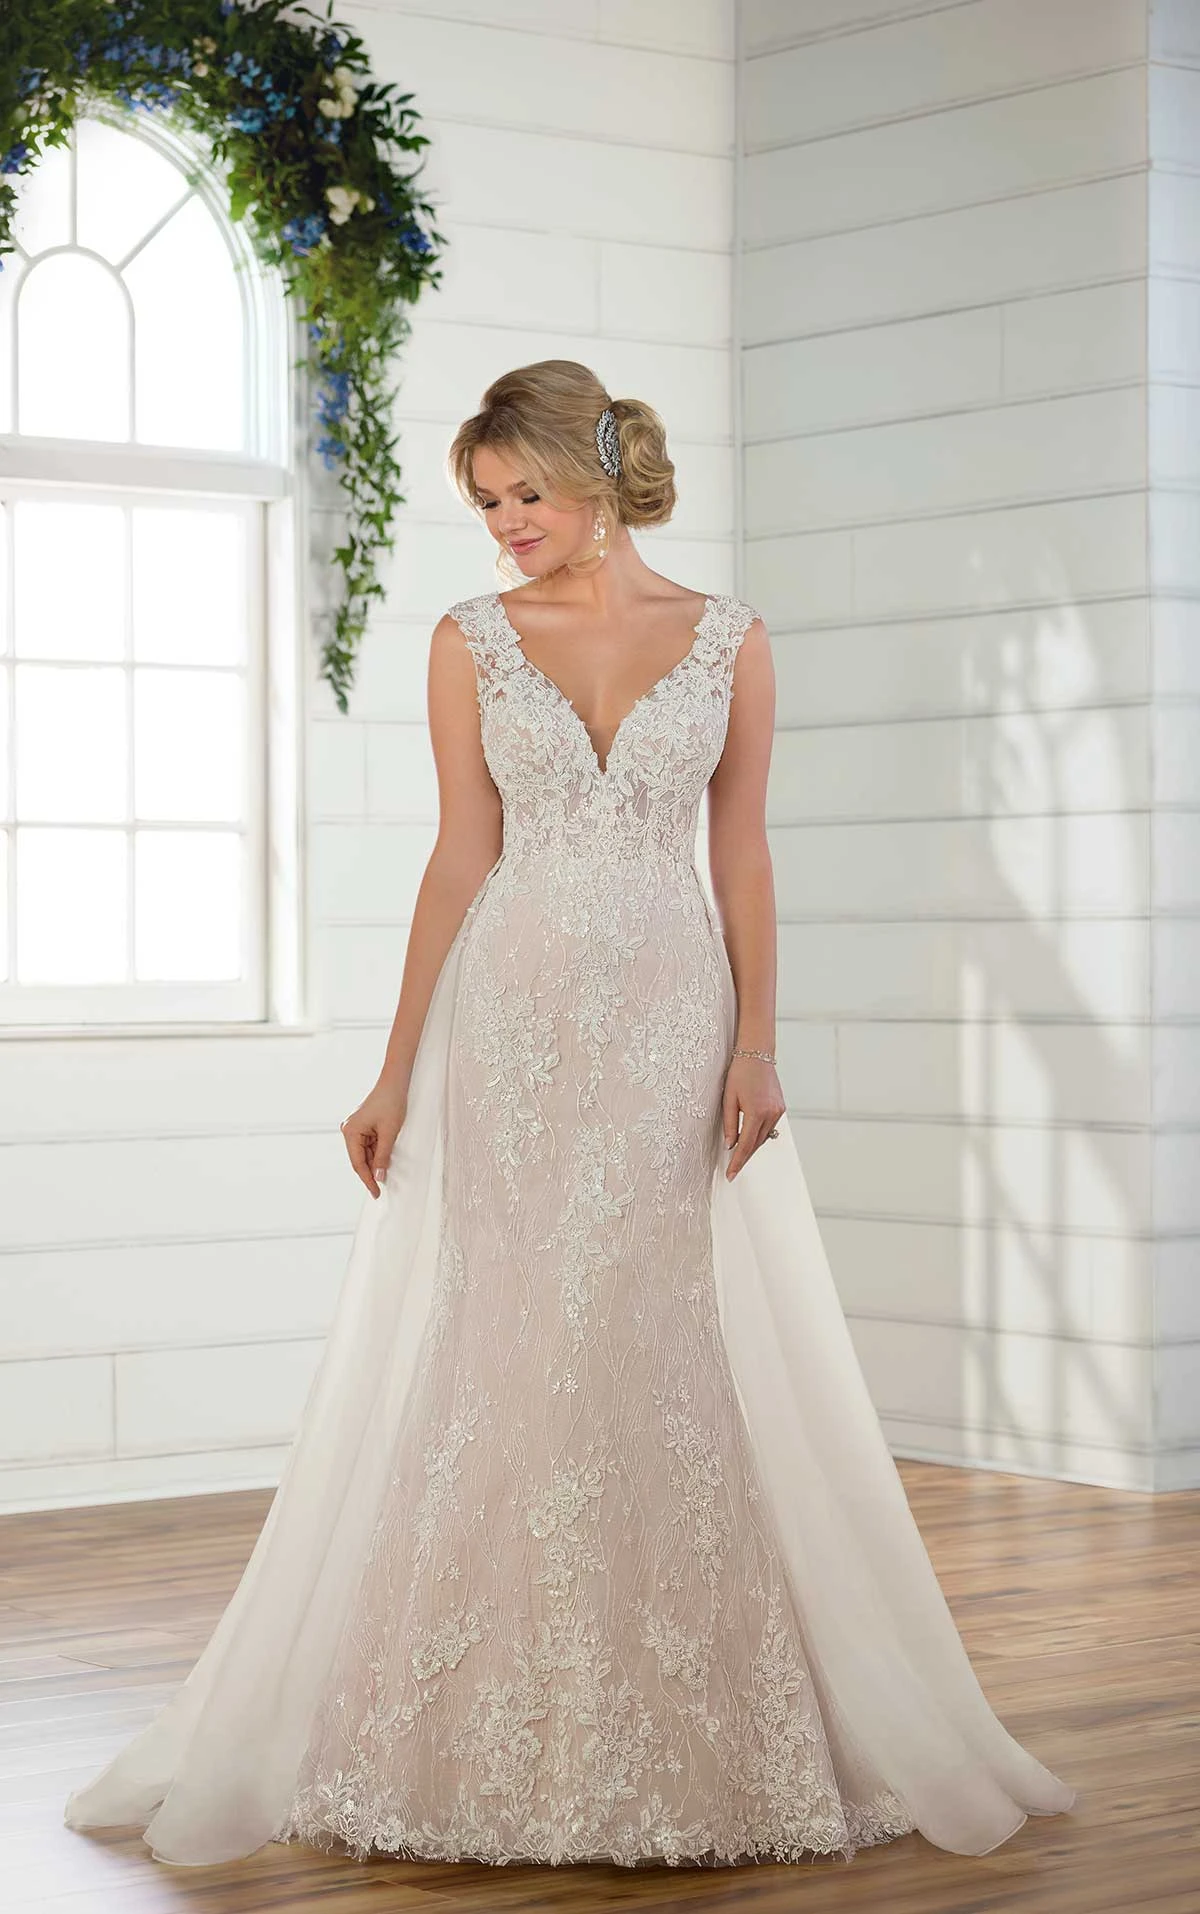 Lace Sparkly Fit and Flare Wedding Dress Essense of